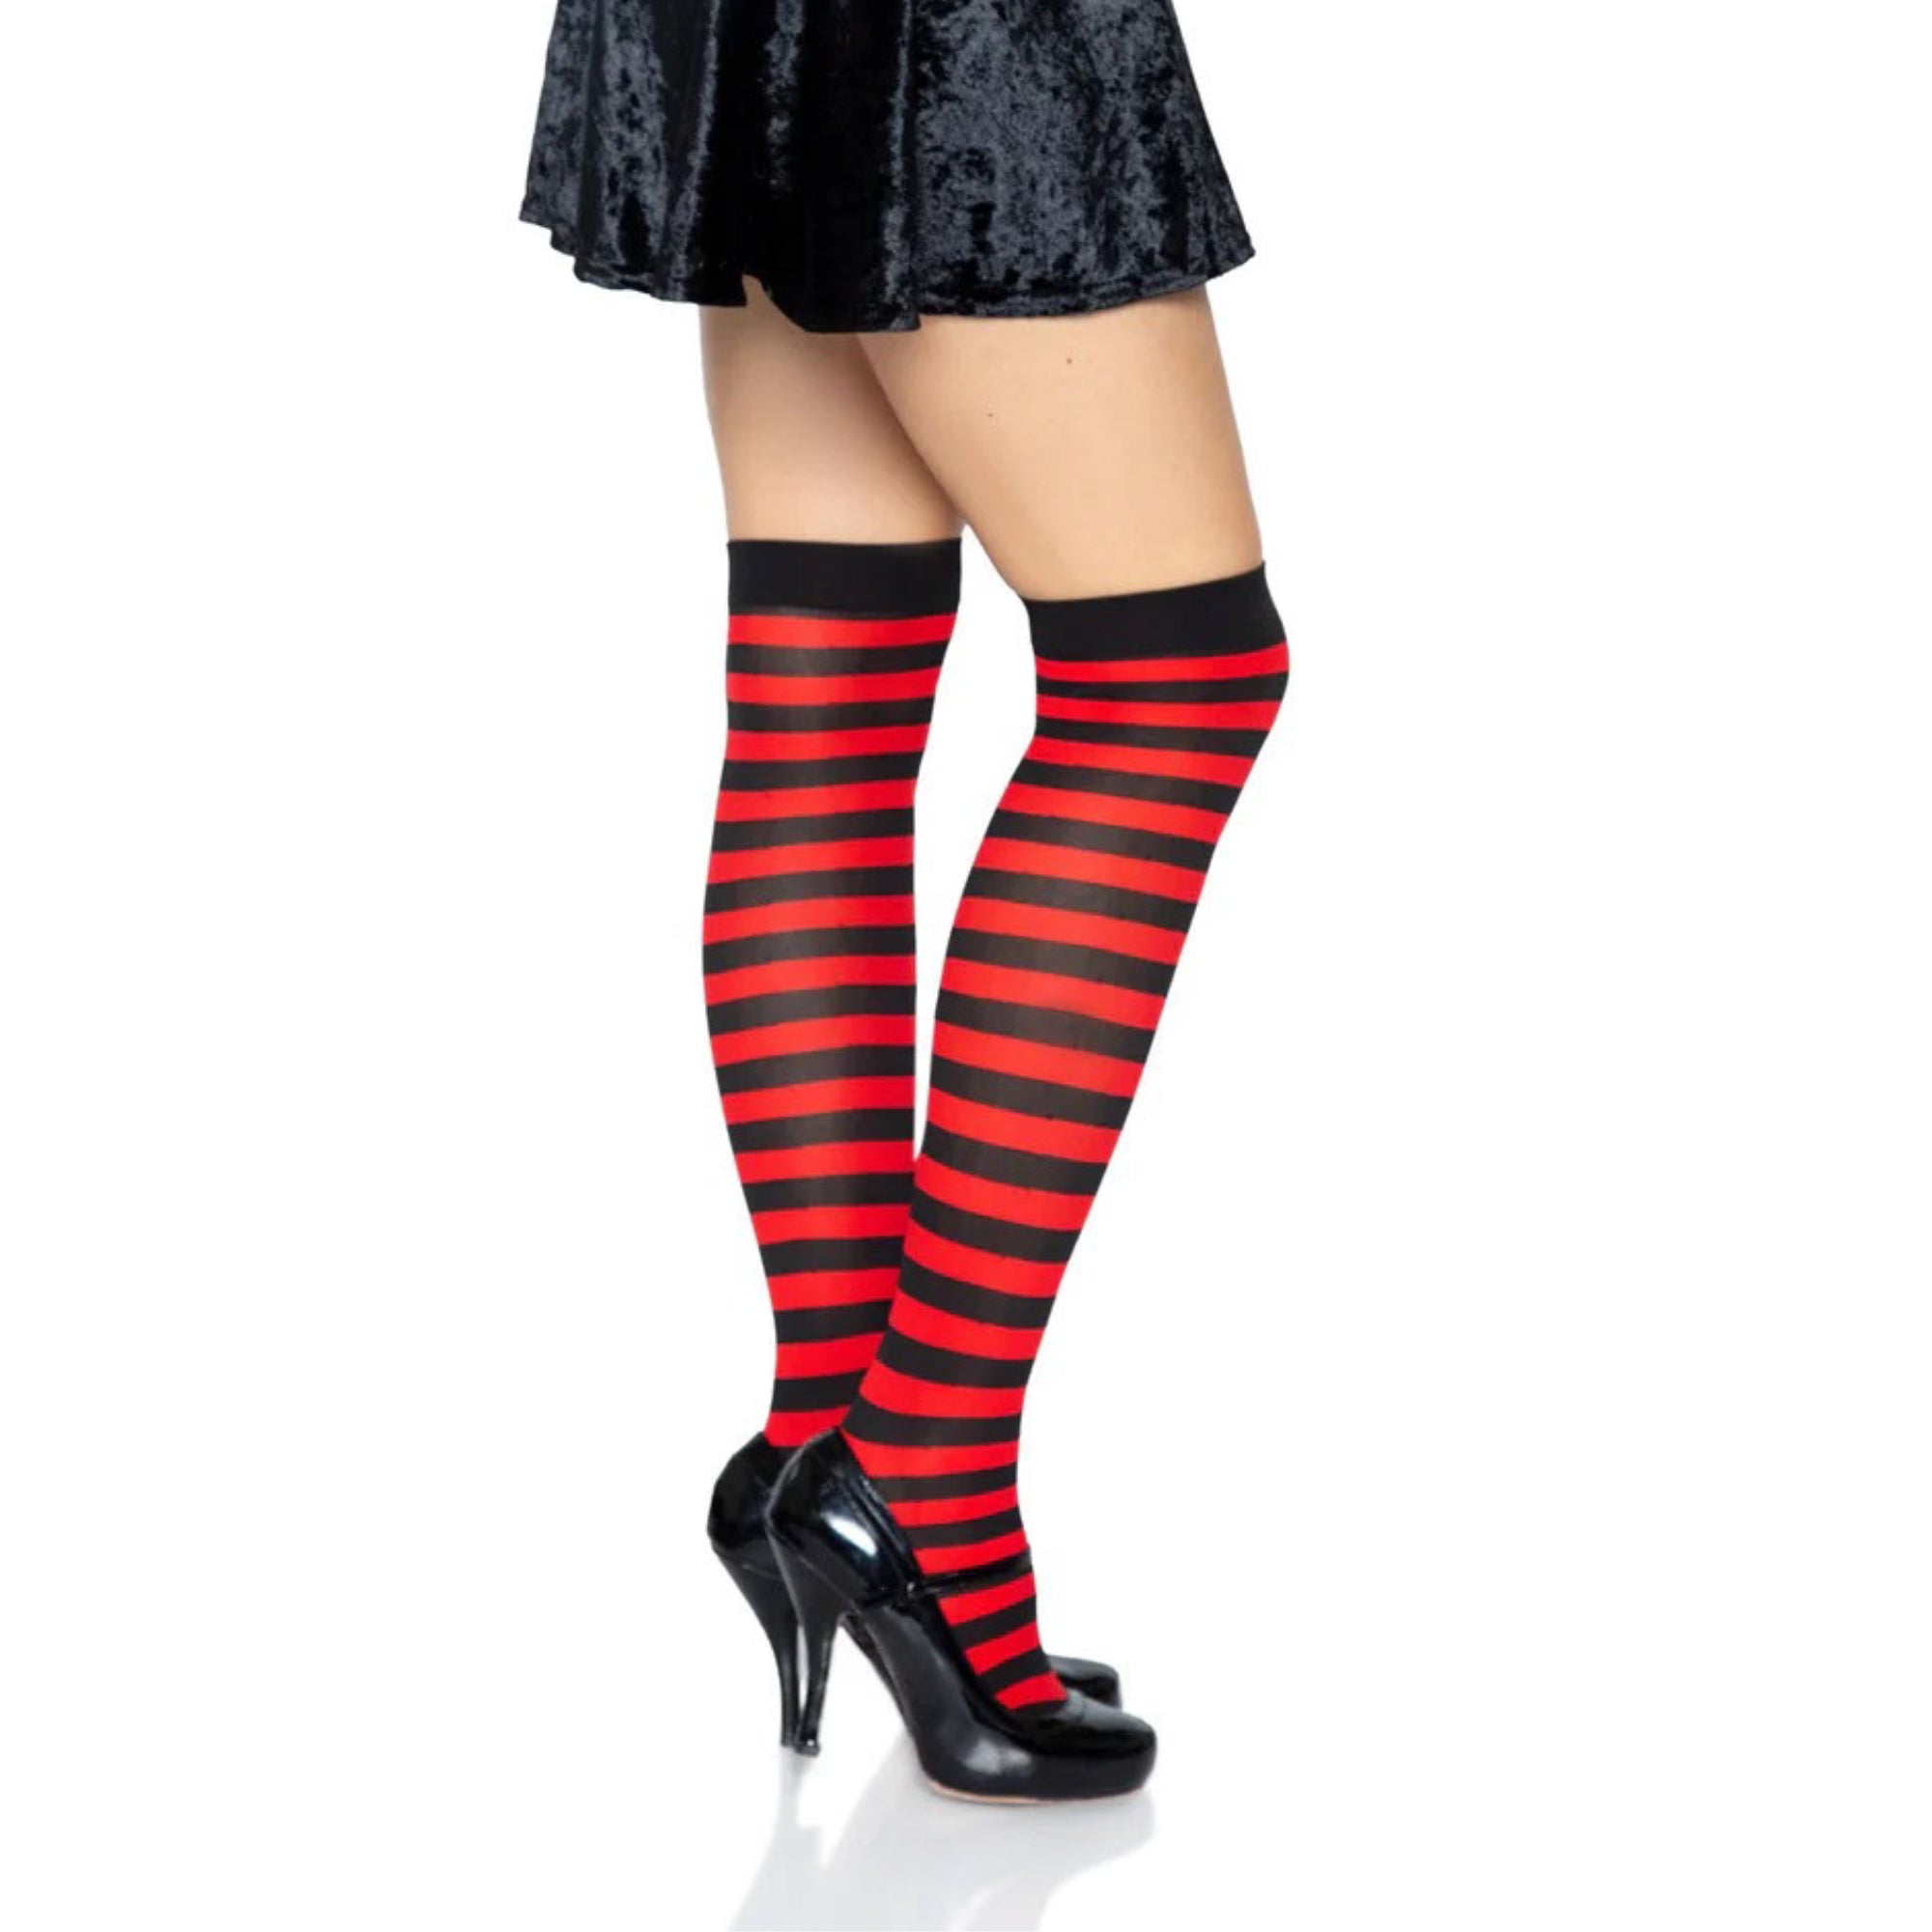 Thin Striped Patterned Socks (Thigh High) from the Sock Panda Red